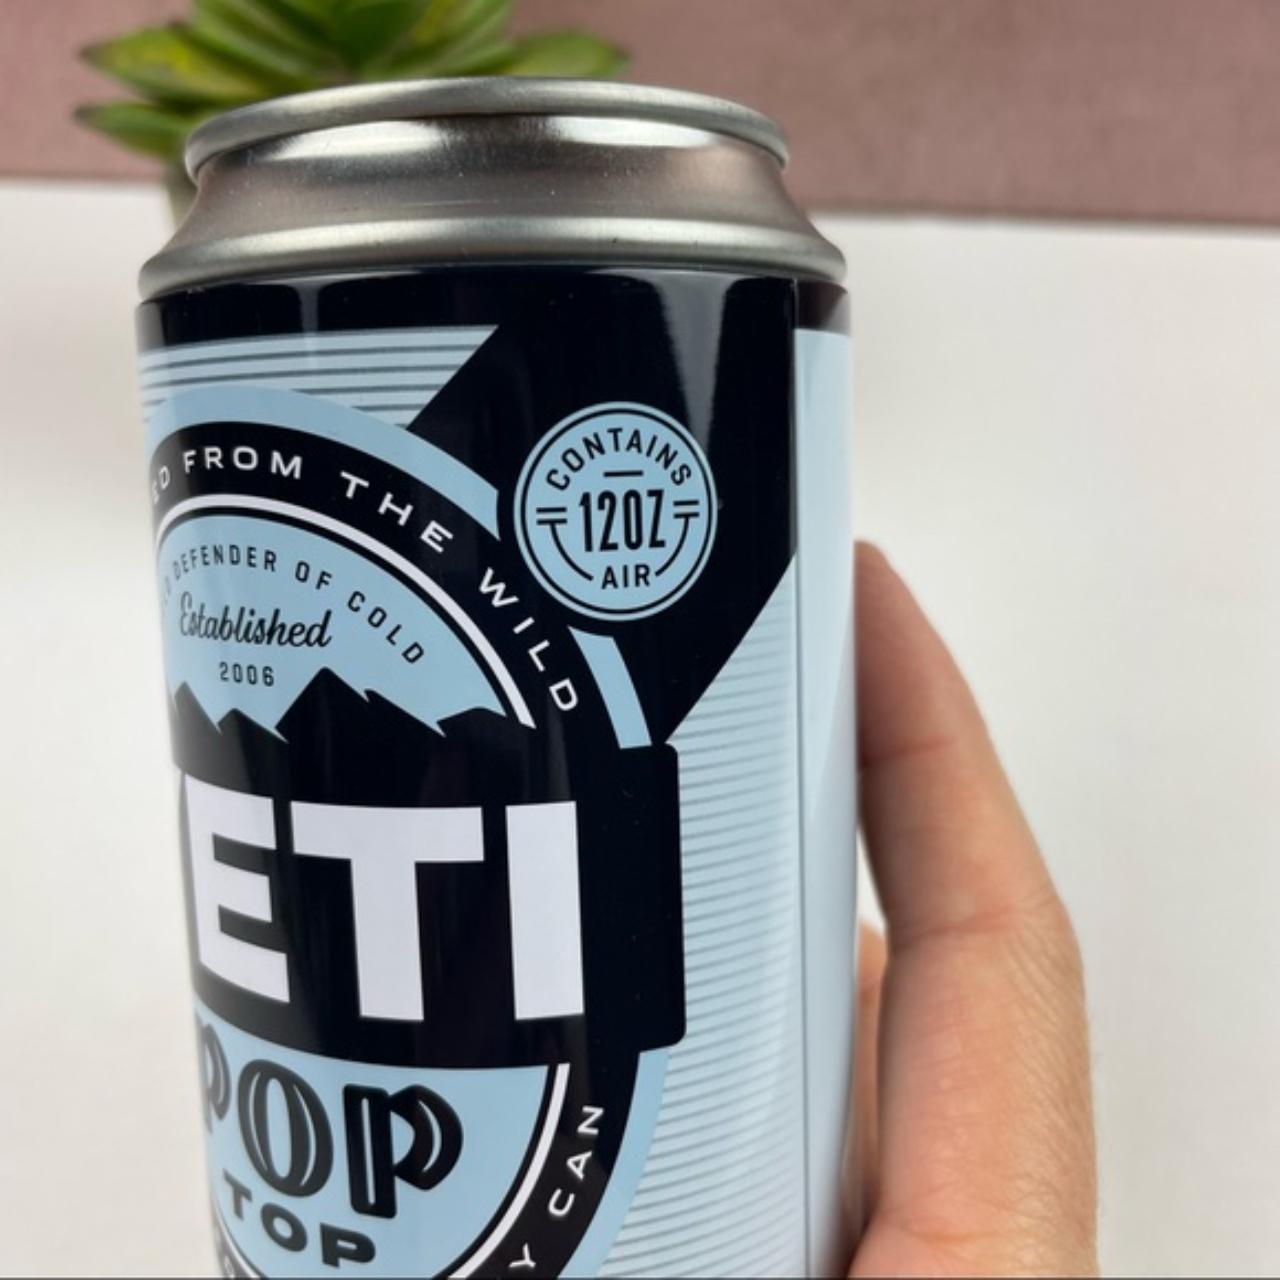 NEW Yeti Pop top 12 oz Can Limited Edition - Hidden Storage Or Bottle Holder